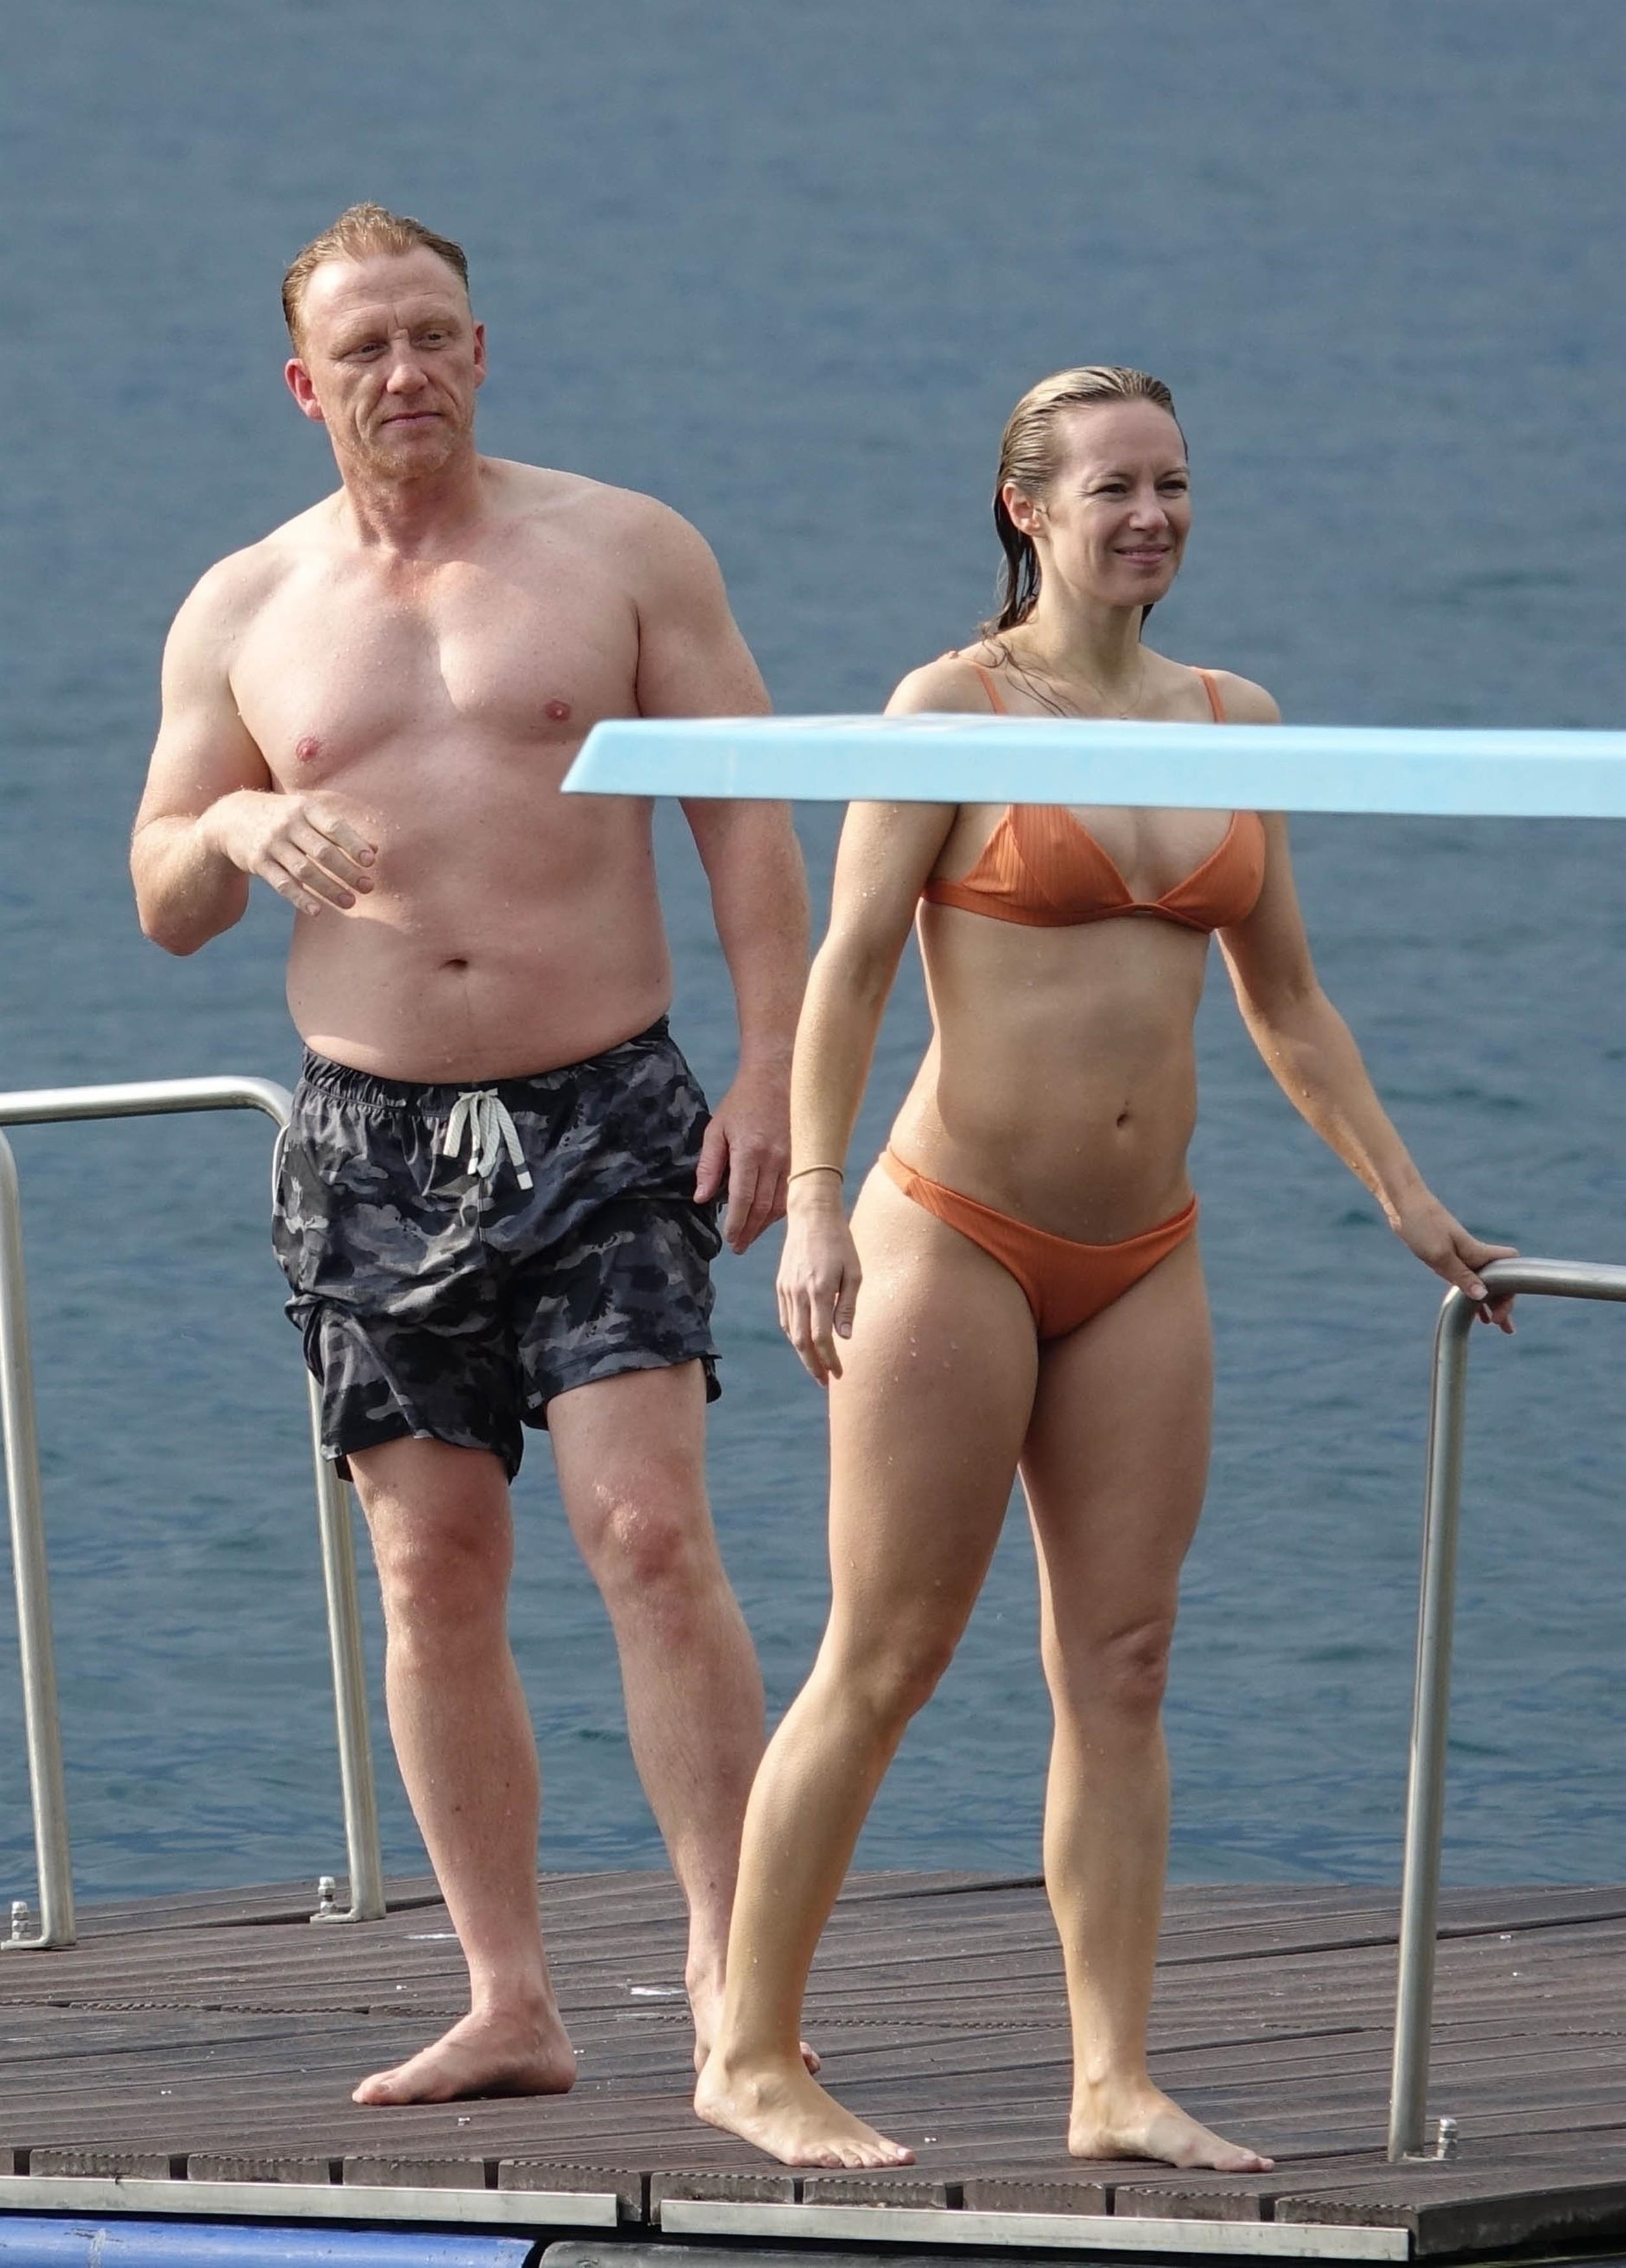 <p>Kevin McKidd and girlfriend and co-star Danielle Savre went for a swim in Lake Como while vacationing in in Bellagio, Italy, on May 31.</p><p>MORE: <a href="https://www.wonderwall.com/celebrity/best-photos-of-ivanka-trump-in-a-bikini-at-the-beach-swimsuit-body-660506.gallery">See Ivanka Trump's greatest swimsuit and bikini photos</a></p>